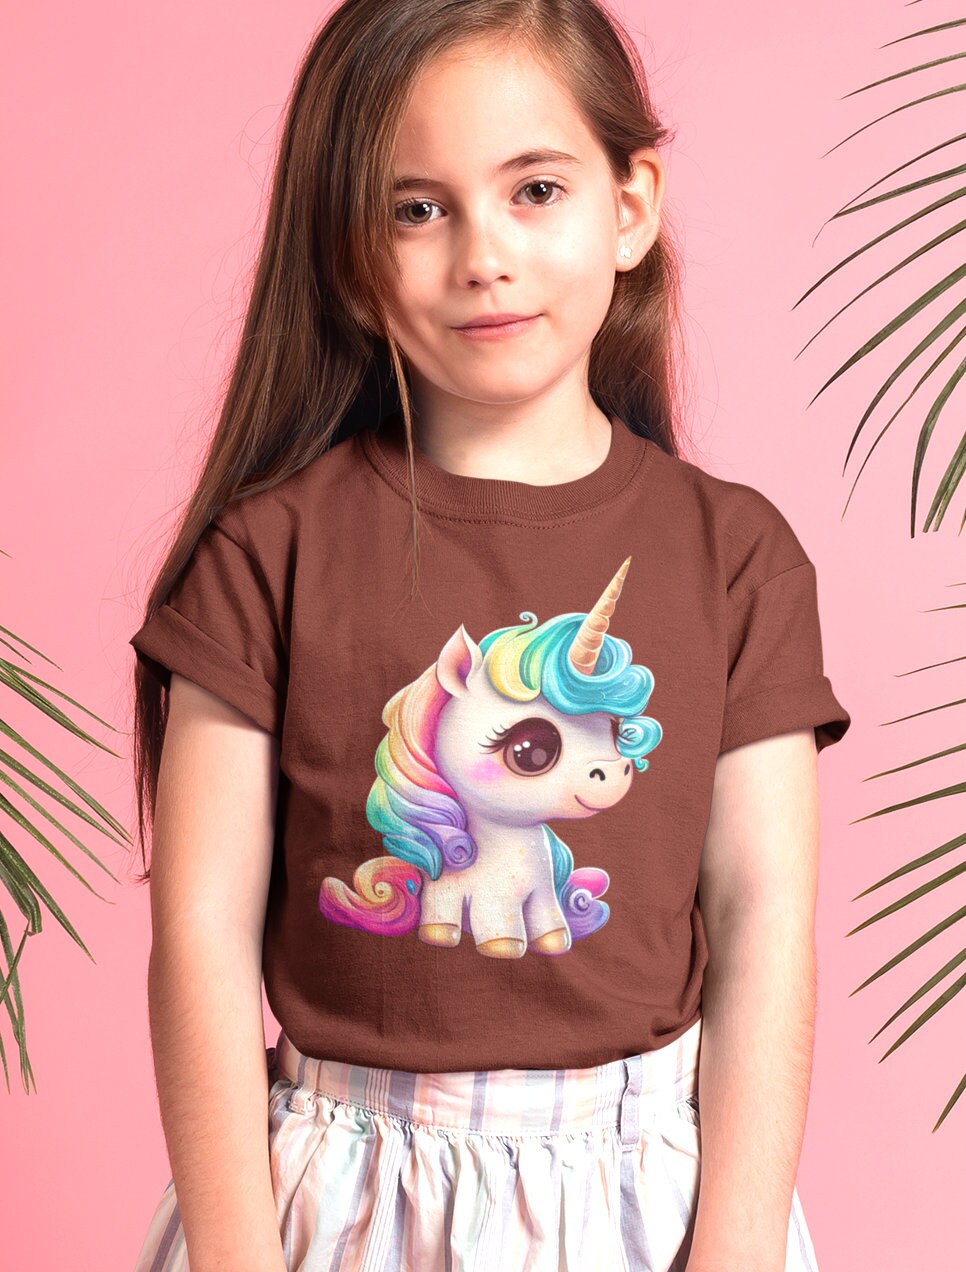 Cute Unicorn Character Transfer for Kids, baby T-shirts, Hoodies, Heat Transfer, Ready for Press Heat Press Transfers DTF98